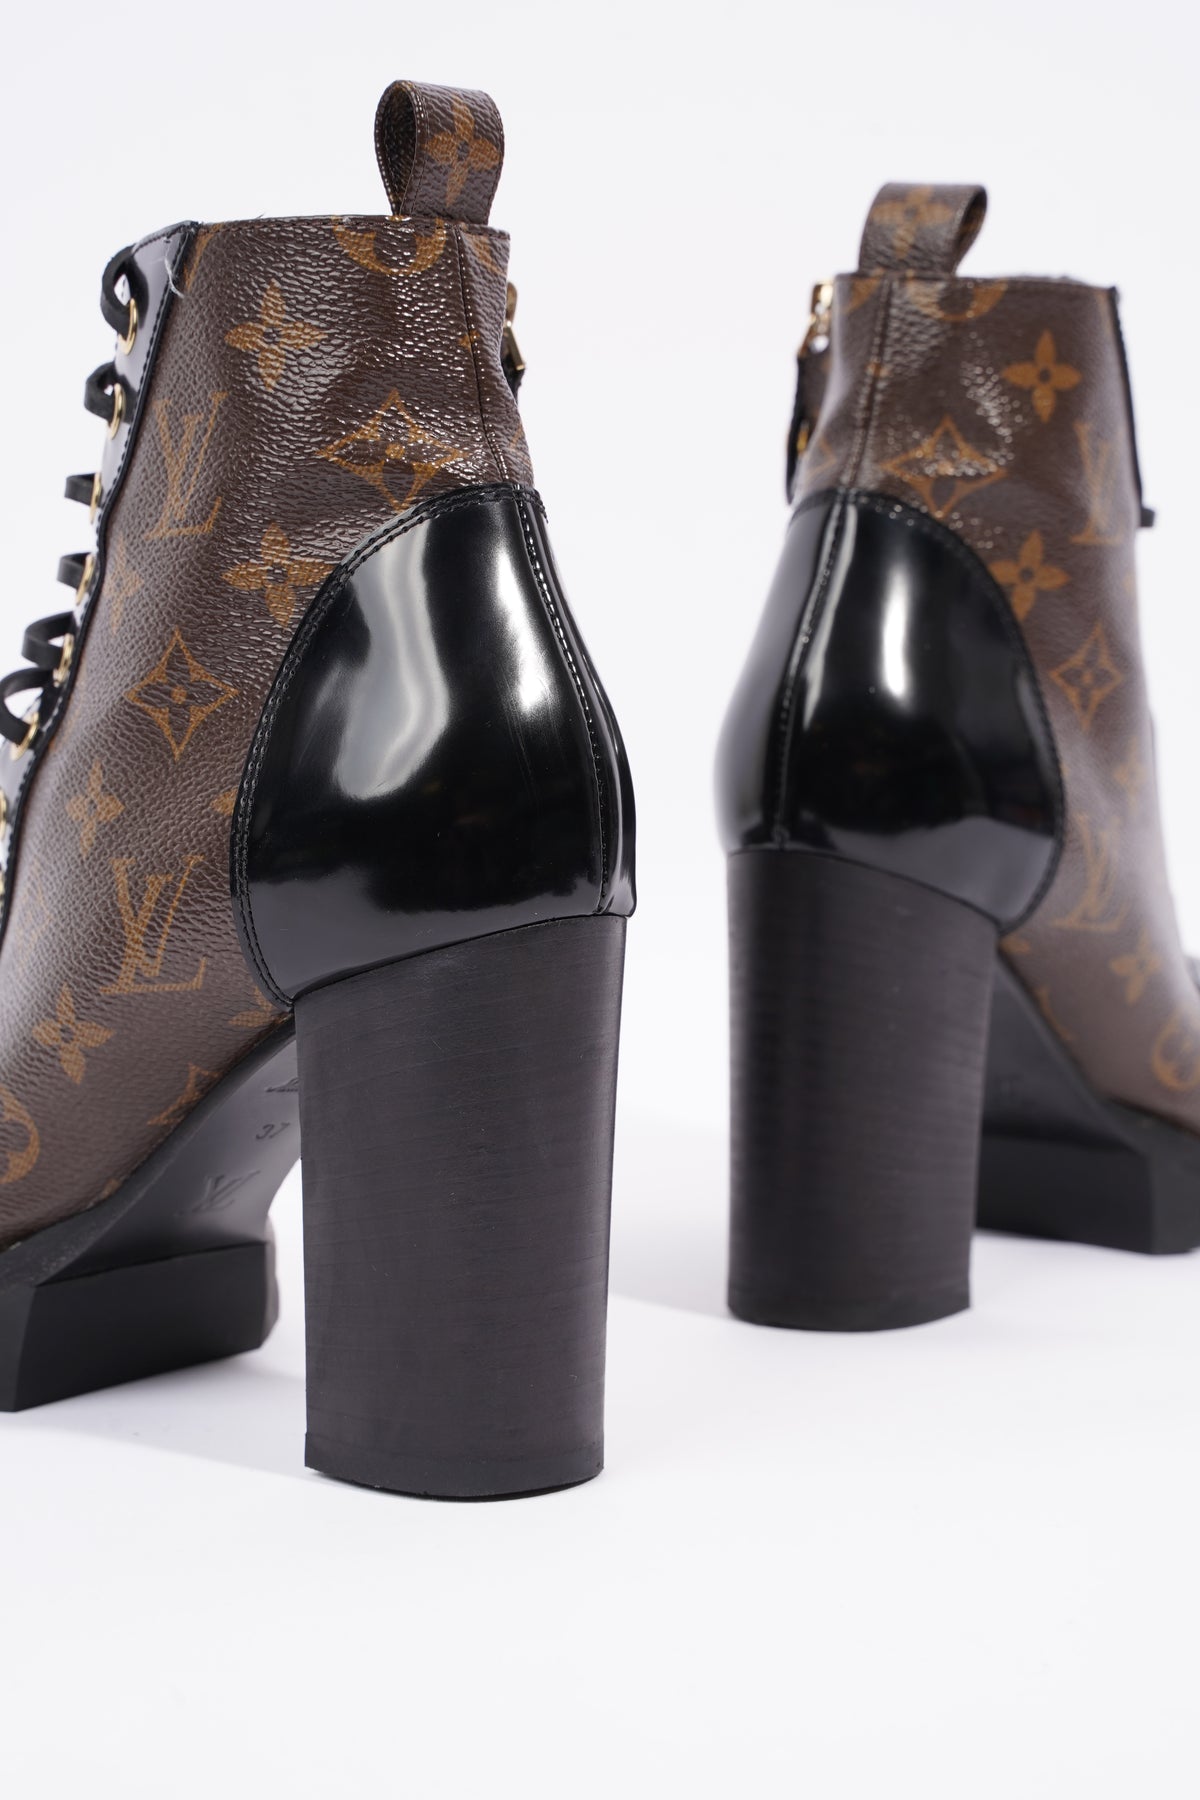 LOUIS VUITTON Monogram Star Trail Ankle Boots 37 - More Than You